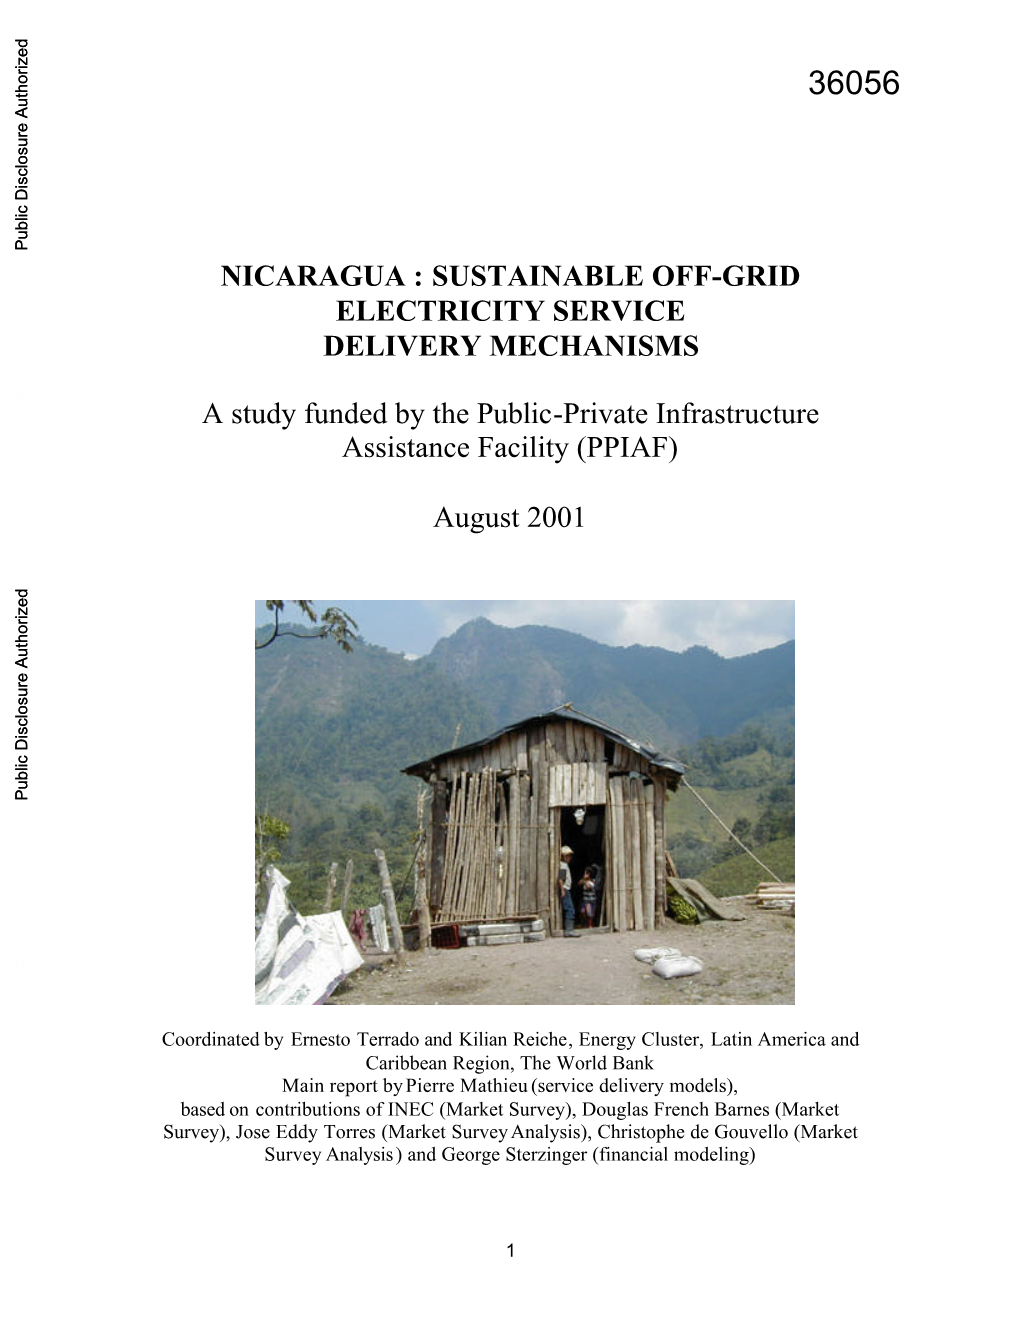 Nicaragua : Sustainable Off-Grid Electricity Service Delivery Mechanisms